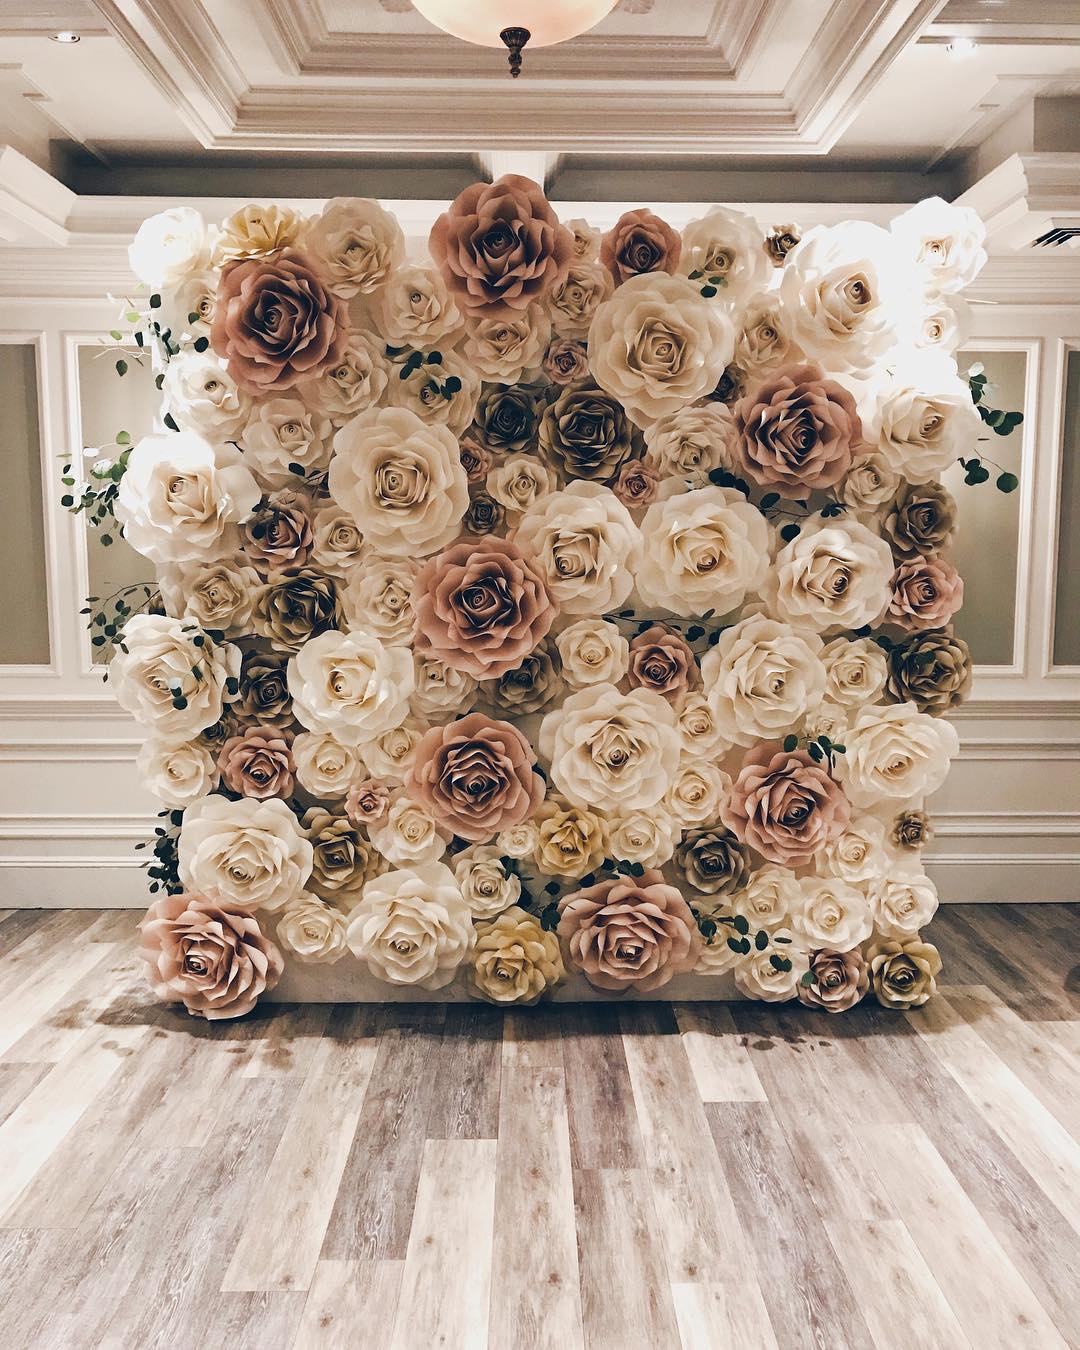 Insta-Worthy Paper Flower Walls to Swoon Over - new york paper flowers - cream paper flower wall - article on thursd